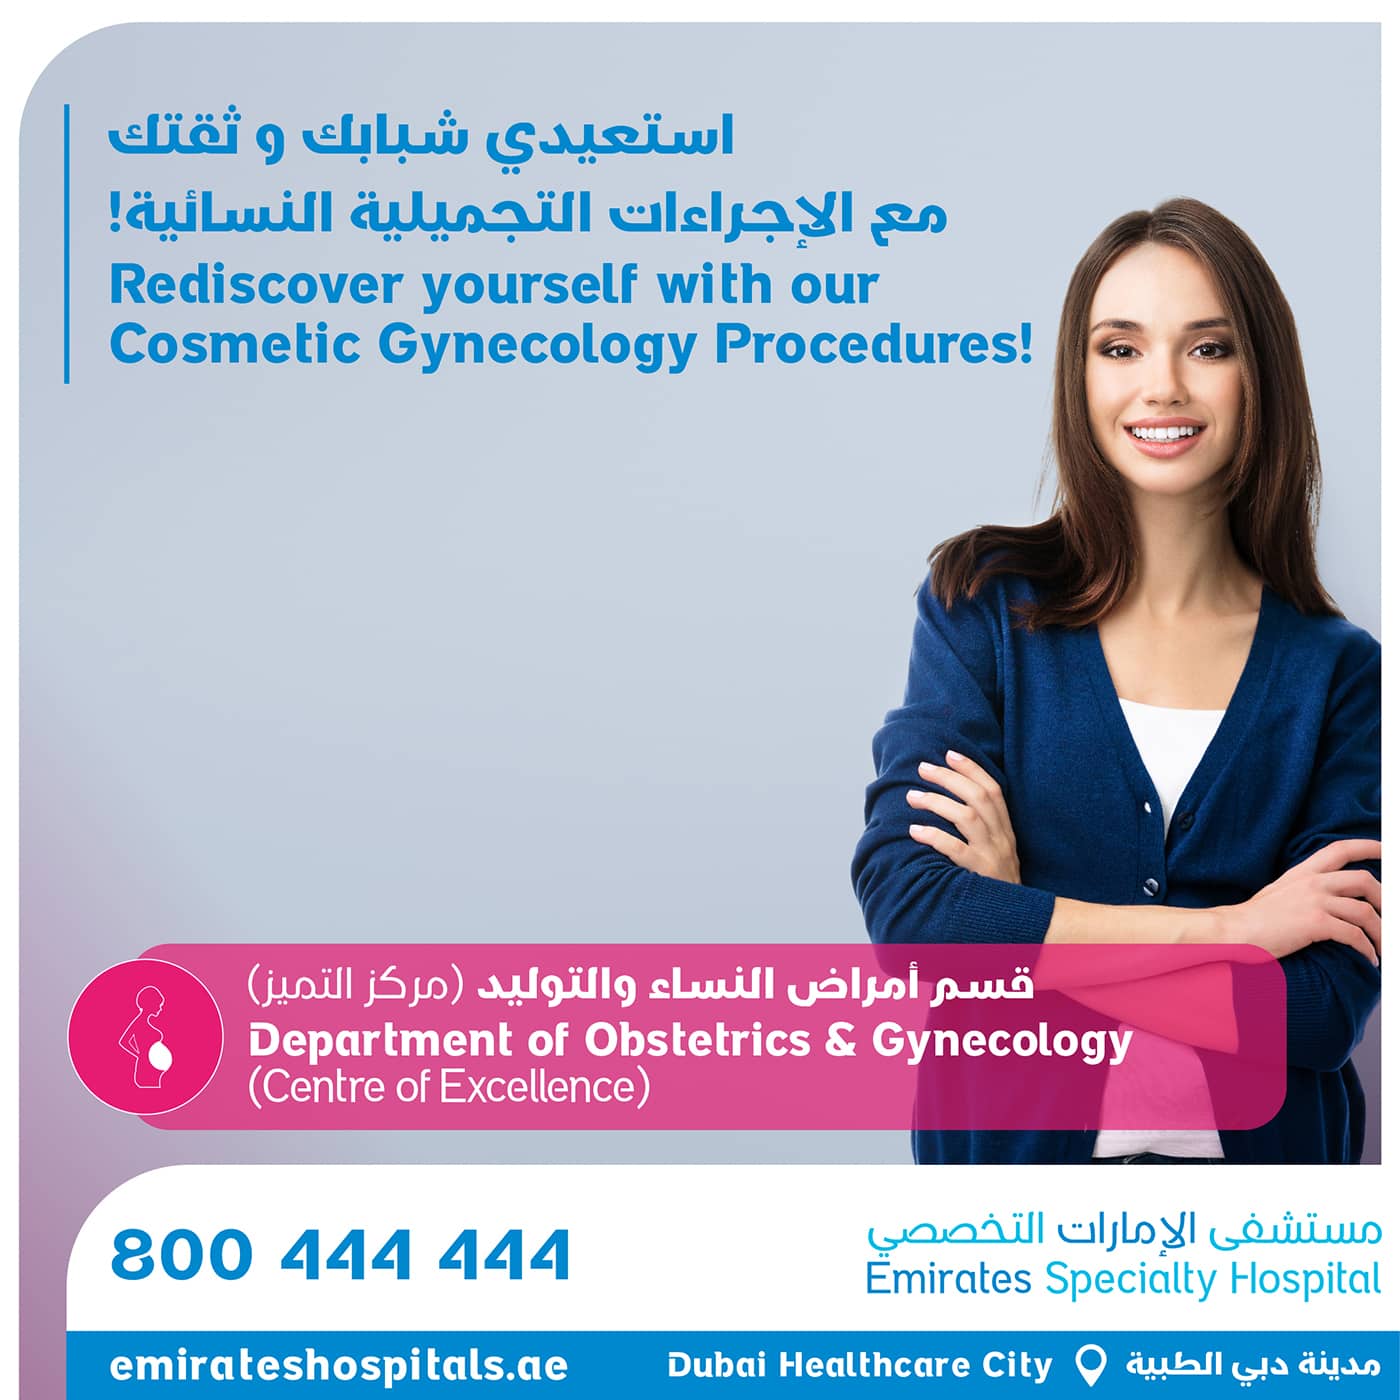 Rediscover yourself with our Cosmetics Gynecology Procedures